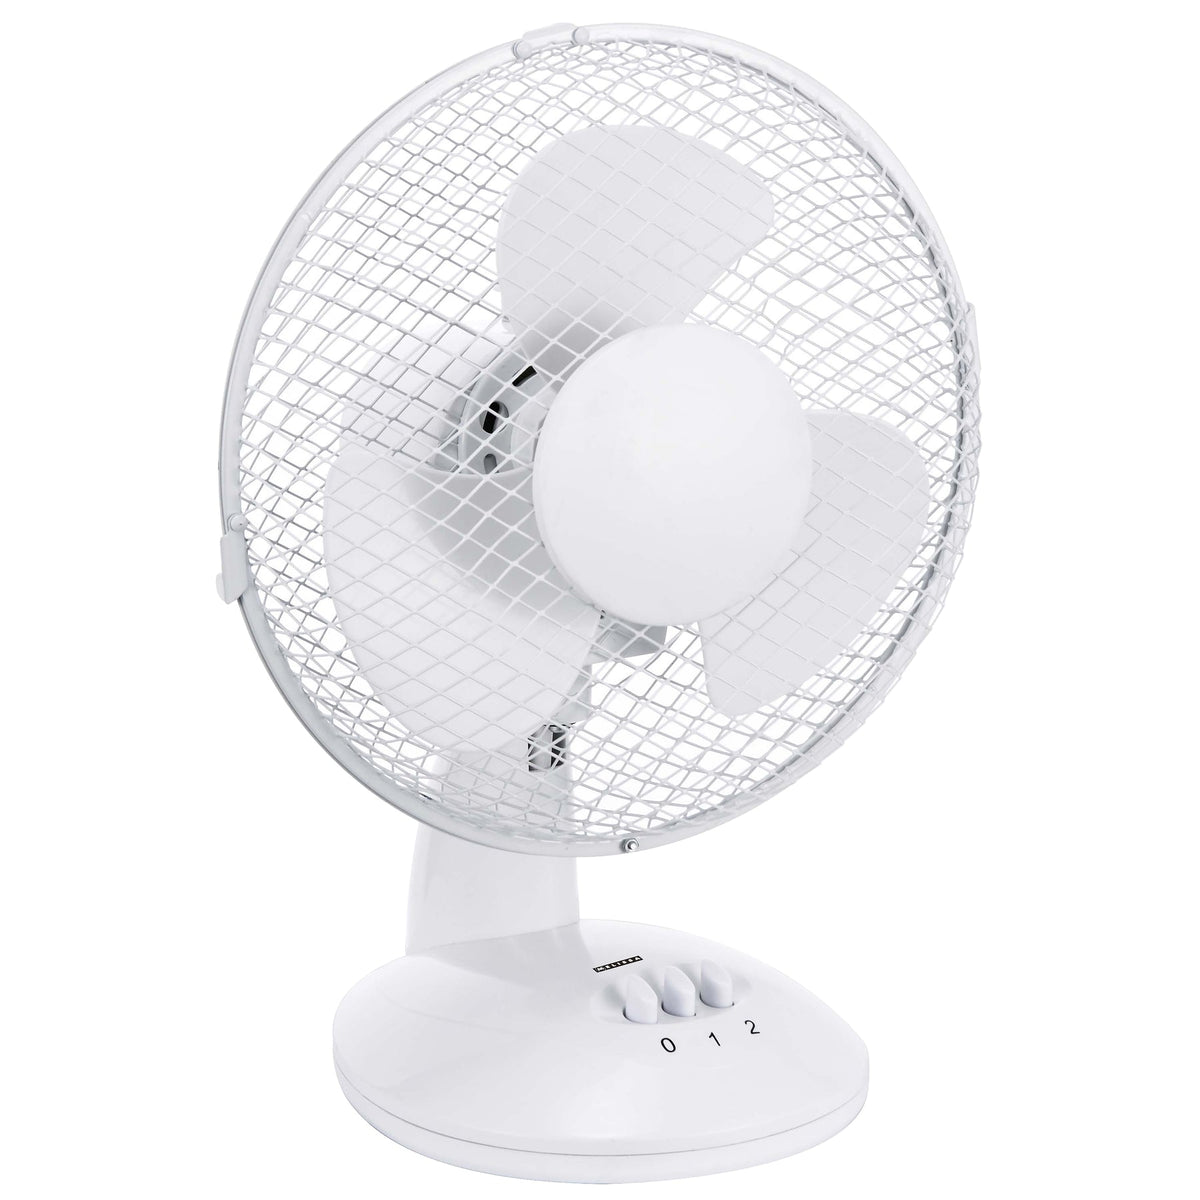 Melissa 23cm Oscillation Table Fan - White | 16510105 from Melissa - DID Electrical